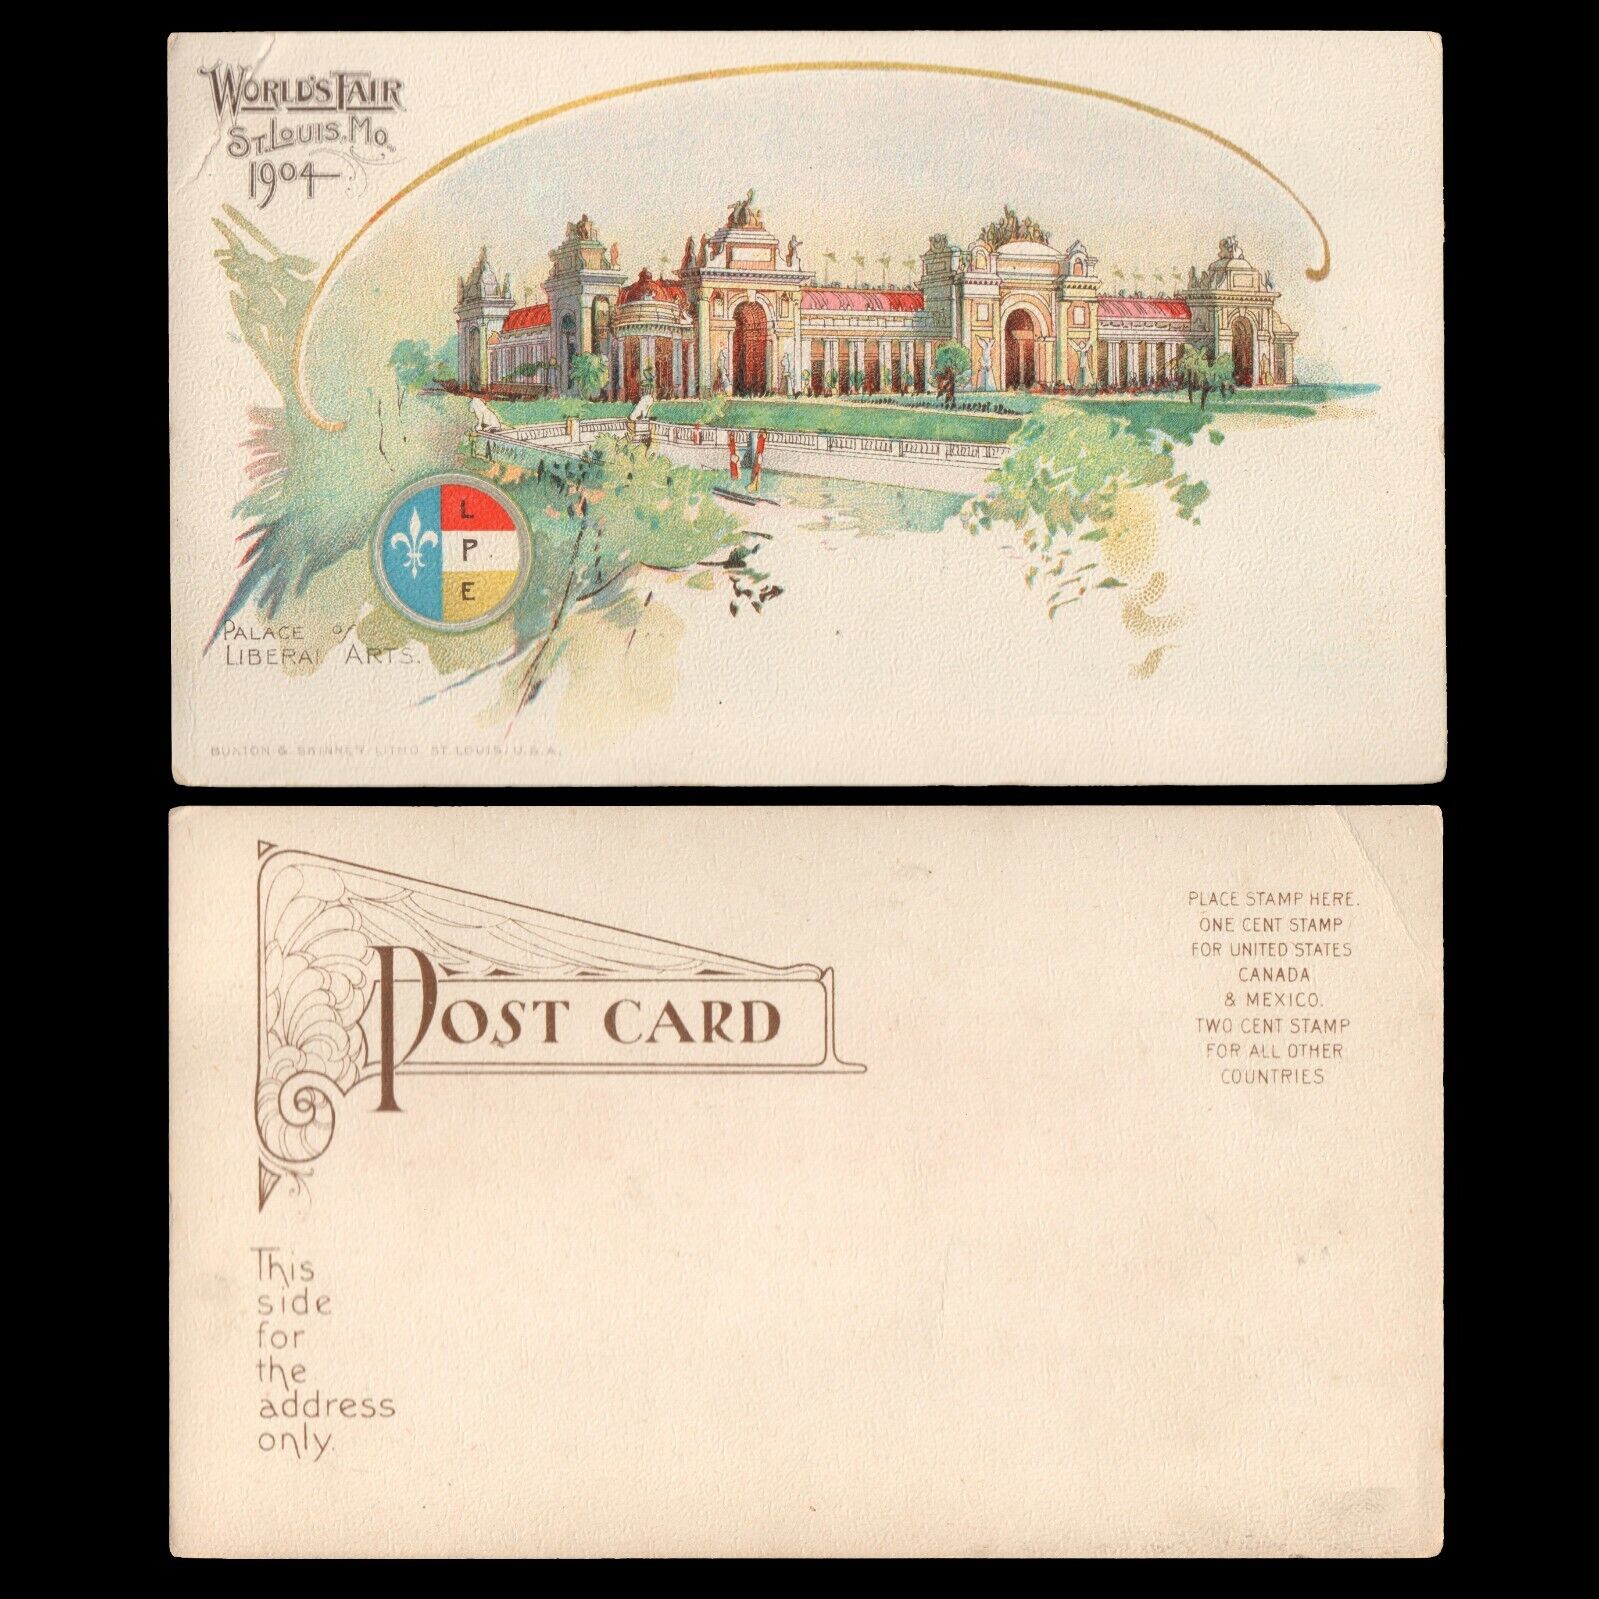 1904 St Louis World's Fair LPE Palace of Liberal Arts Unposted UDB Postcard